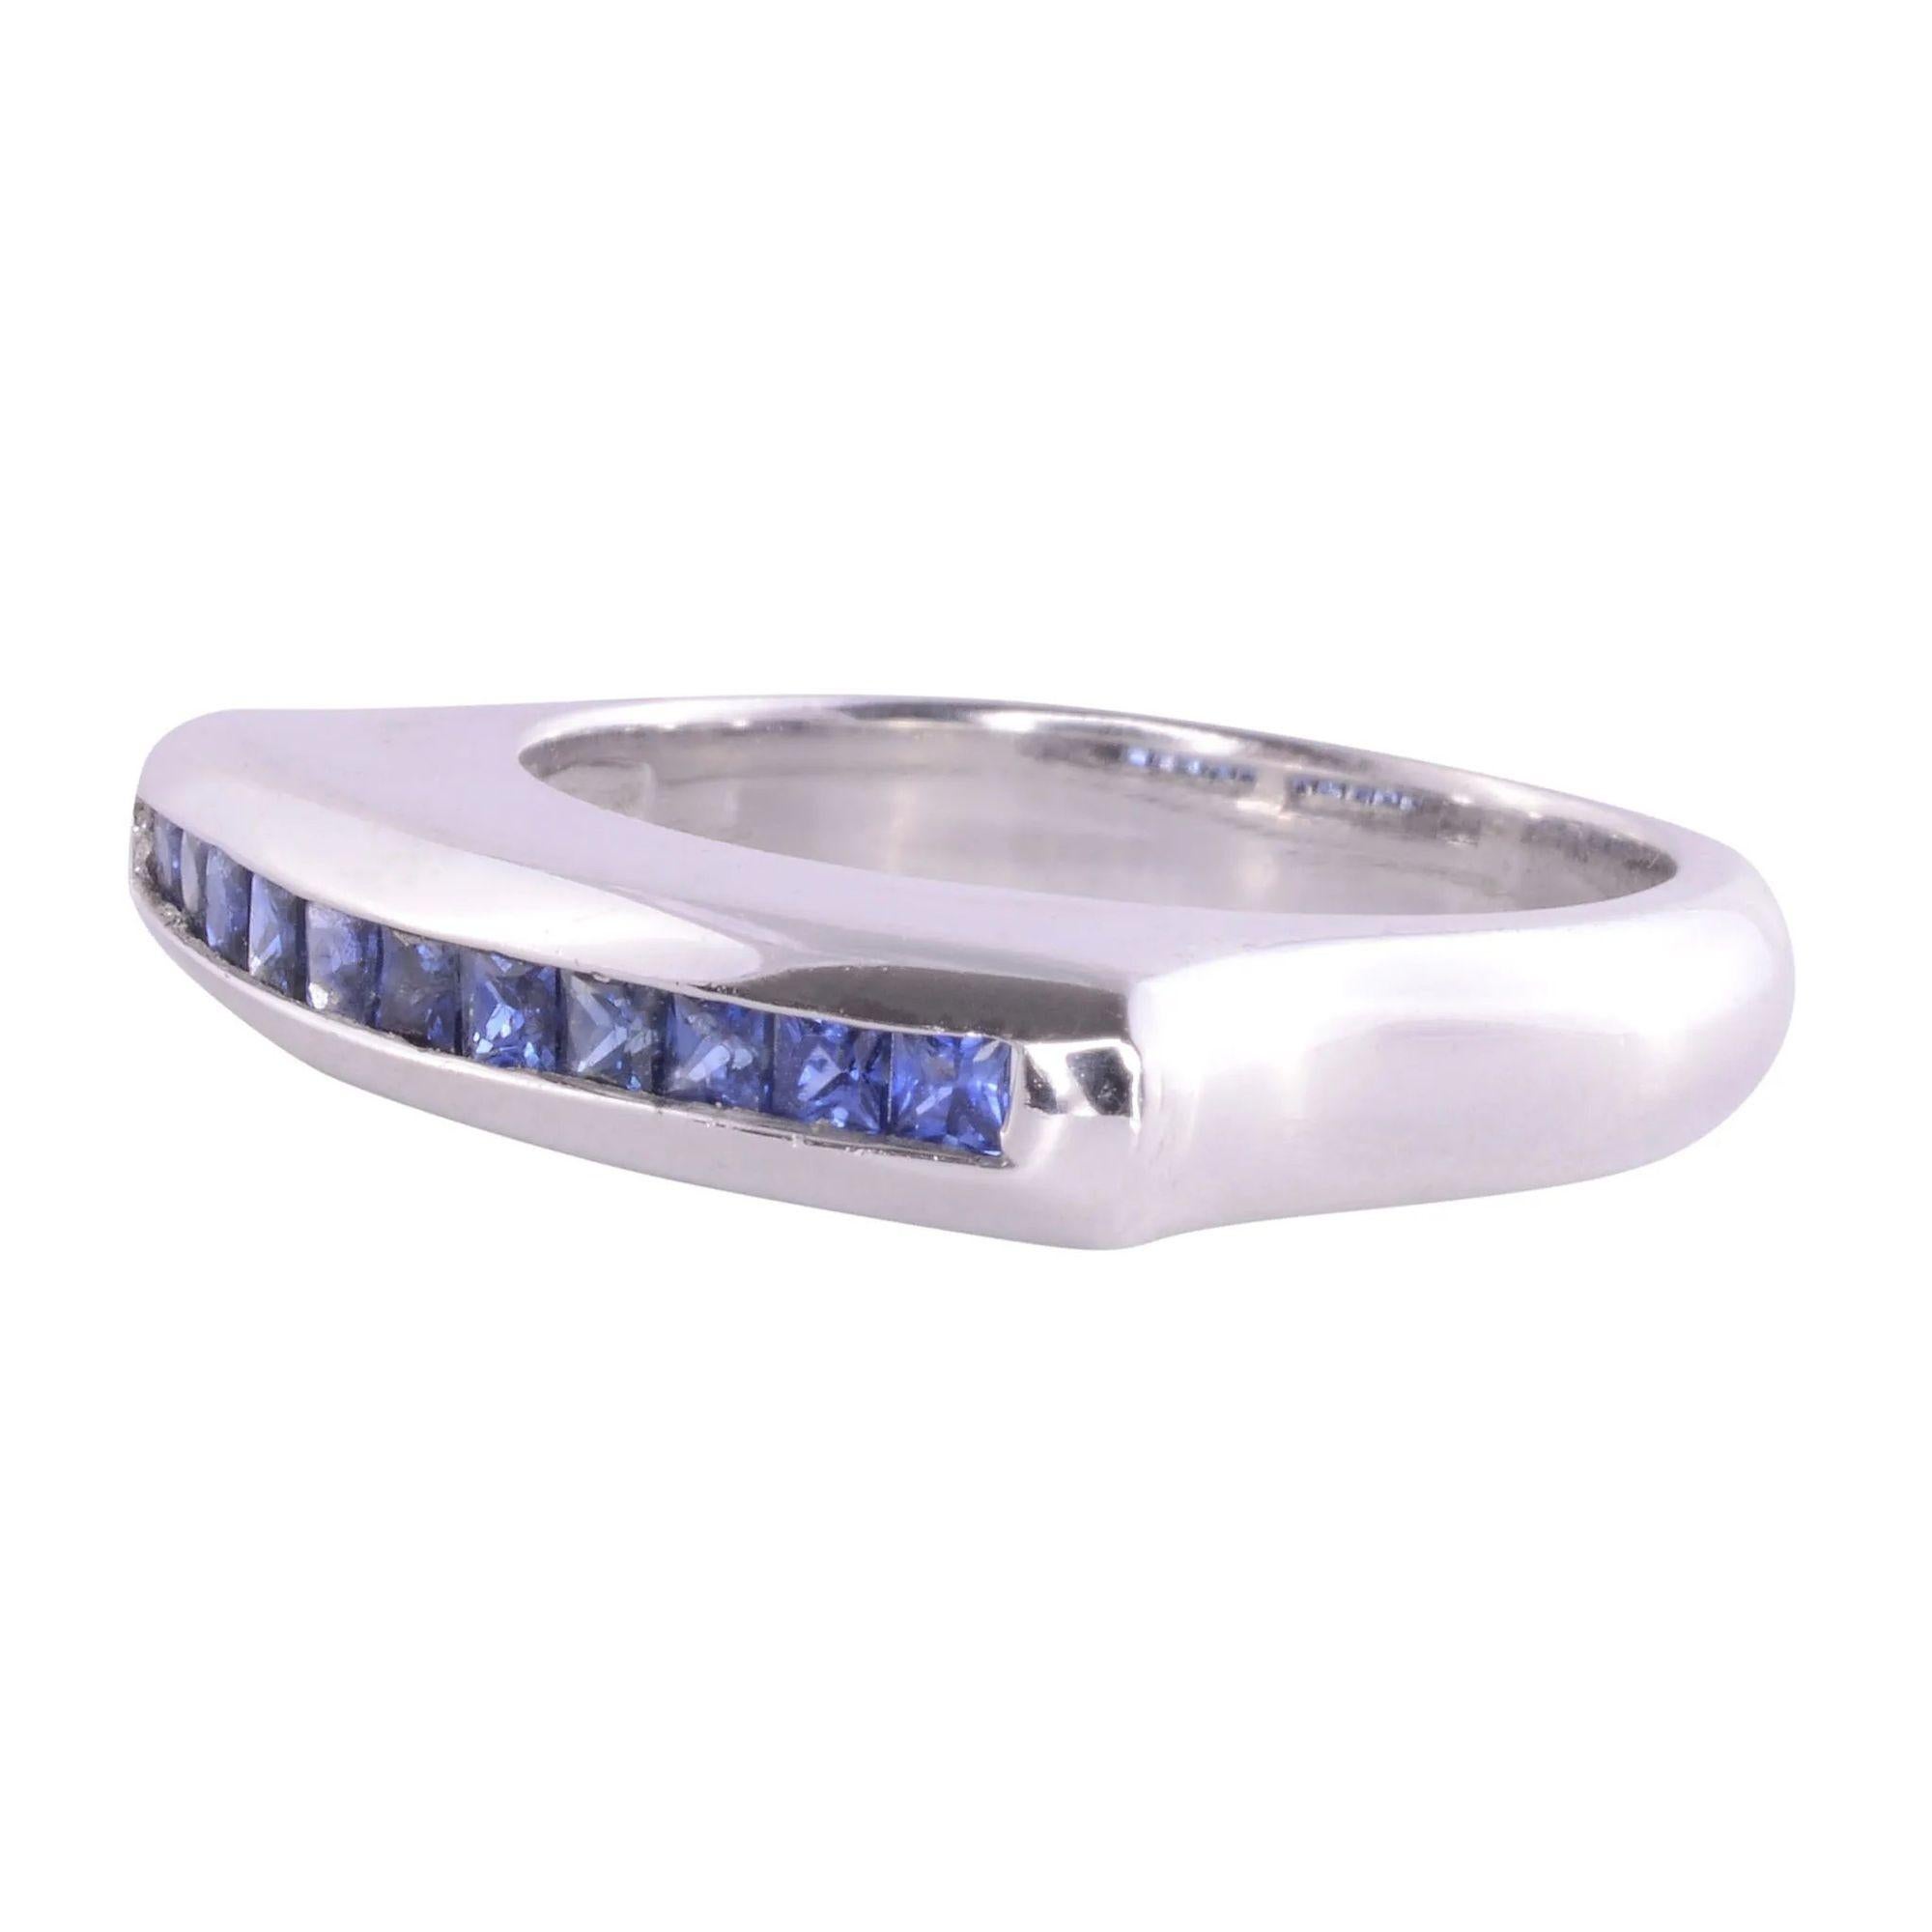 Estate princess cut sapphire 18K white gold band. This 18 karat white gold ring with a row of 11 princess cut sapphires at .50 carat total weight and is a size 6.25.